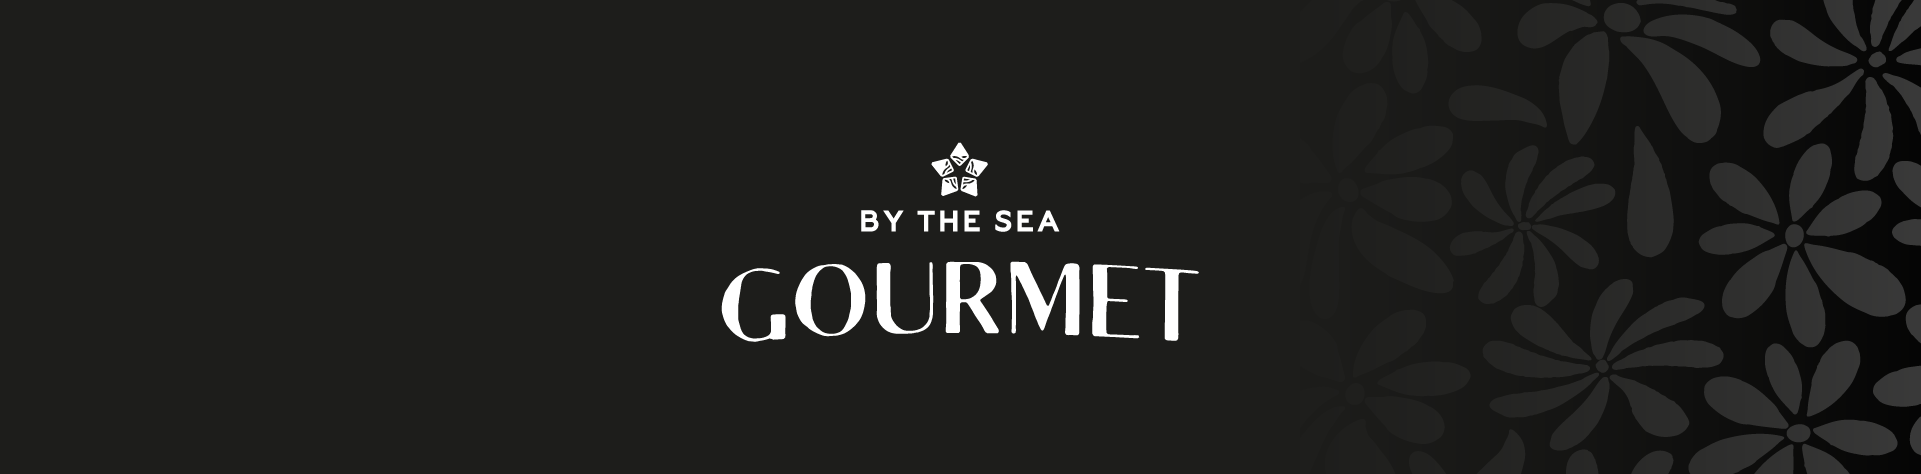 By The Sea Gourmet